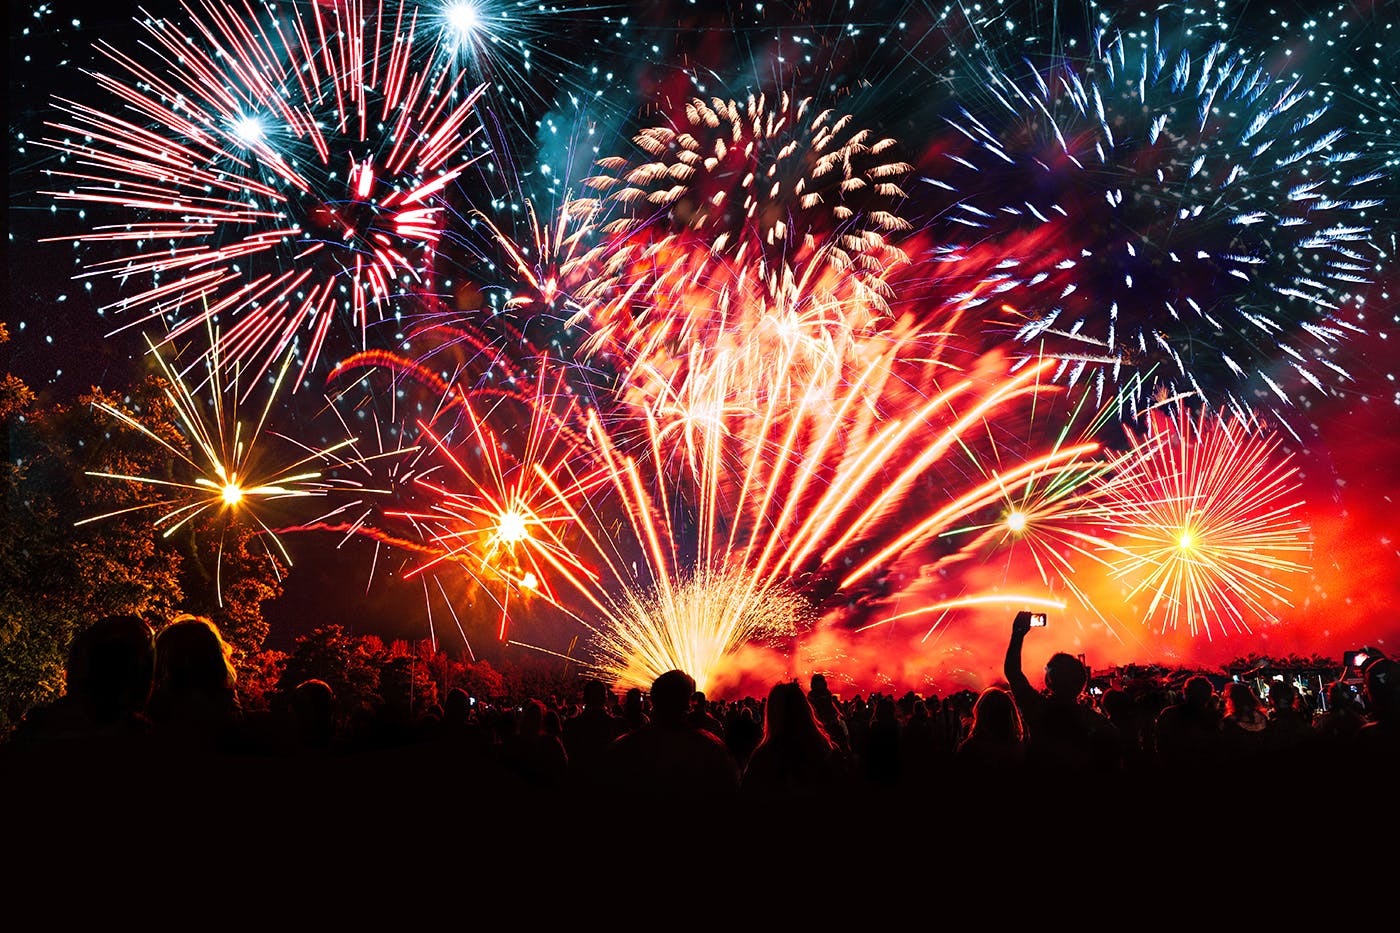 July 4th fireworks and events near me in Youngstown Ohio